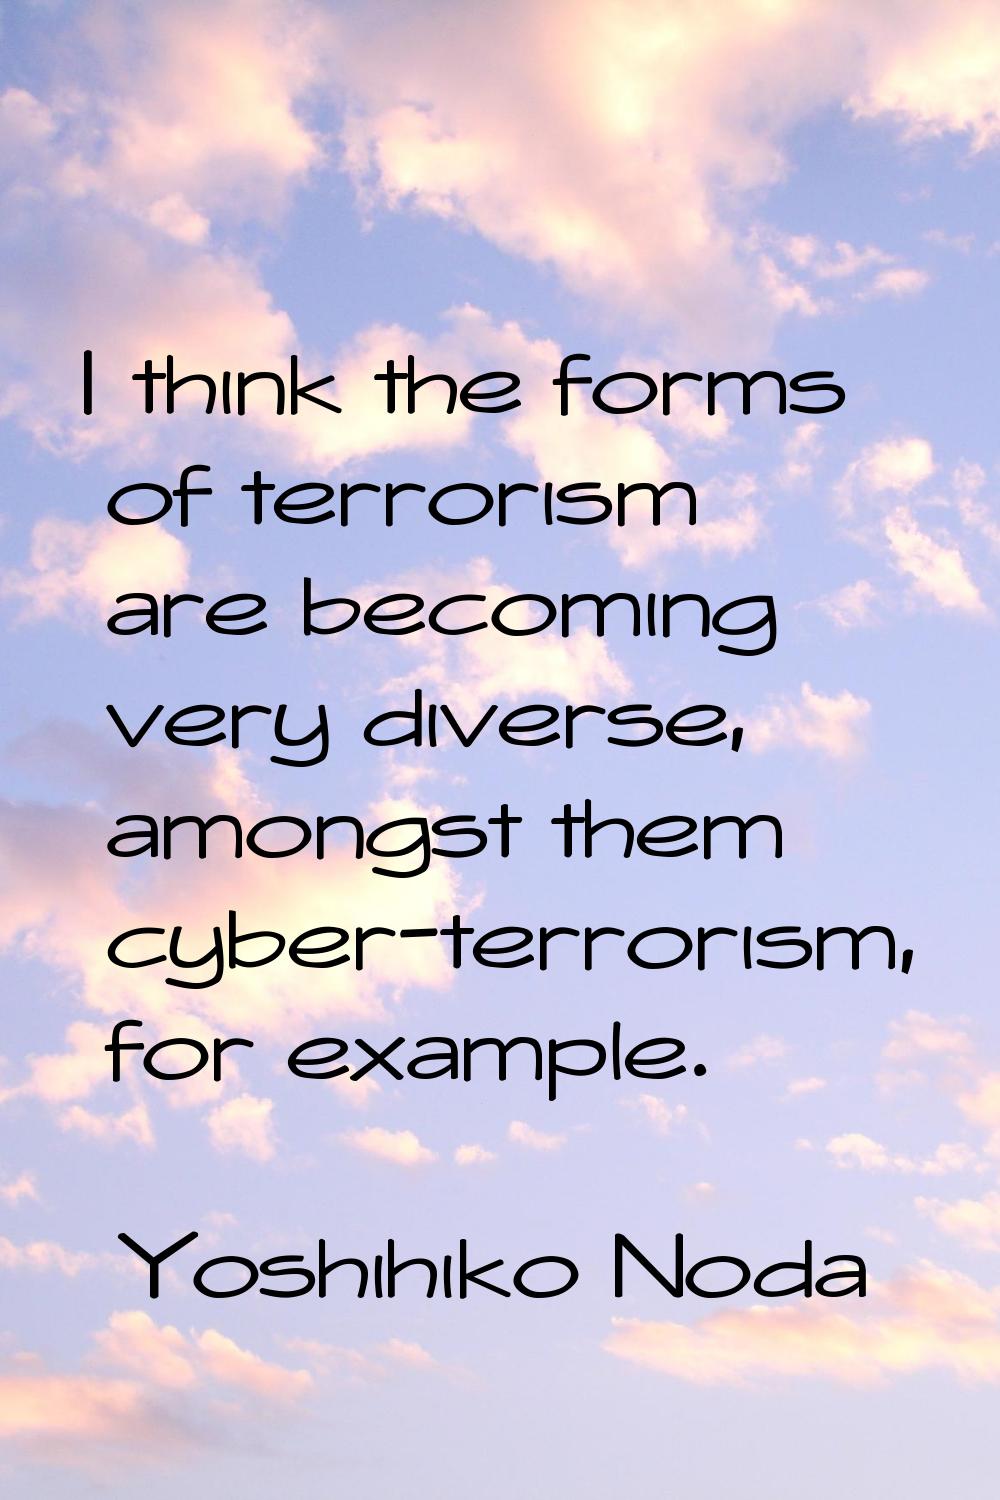 I think the forms of terrorism are becoming very diverse, amongst them cyber-terrorism, for example